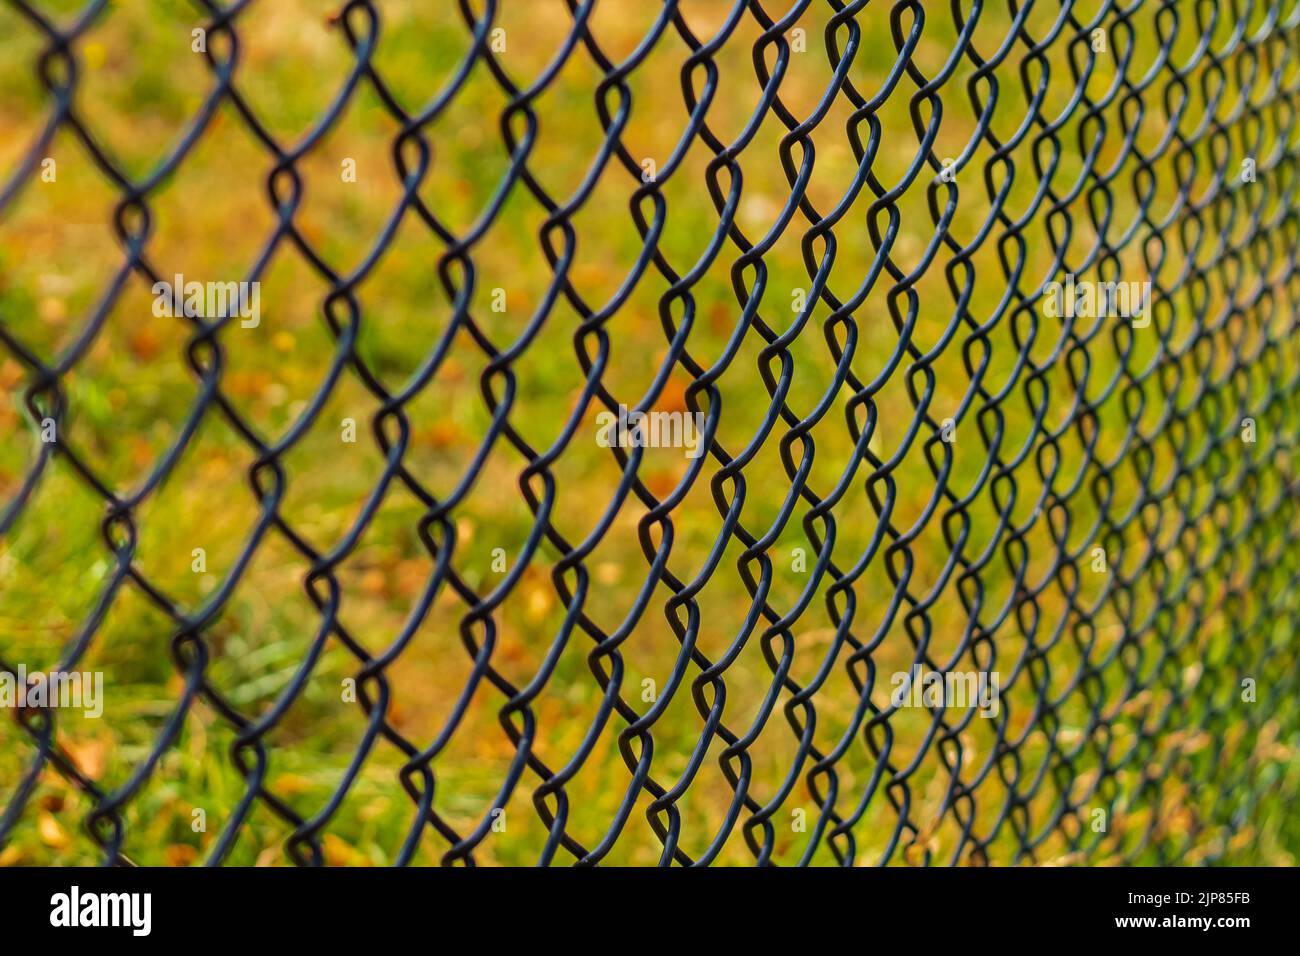 Fence with metal grid in perspective. Metal chain-link fence on a background of green grass close-up, nobody Stock Photo